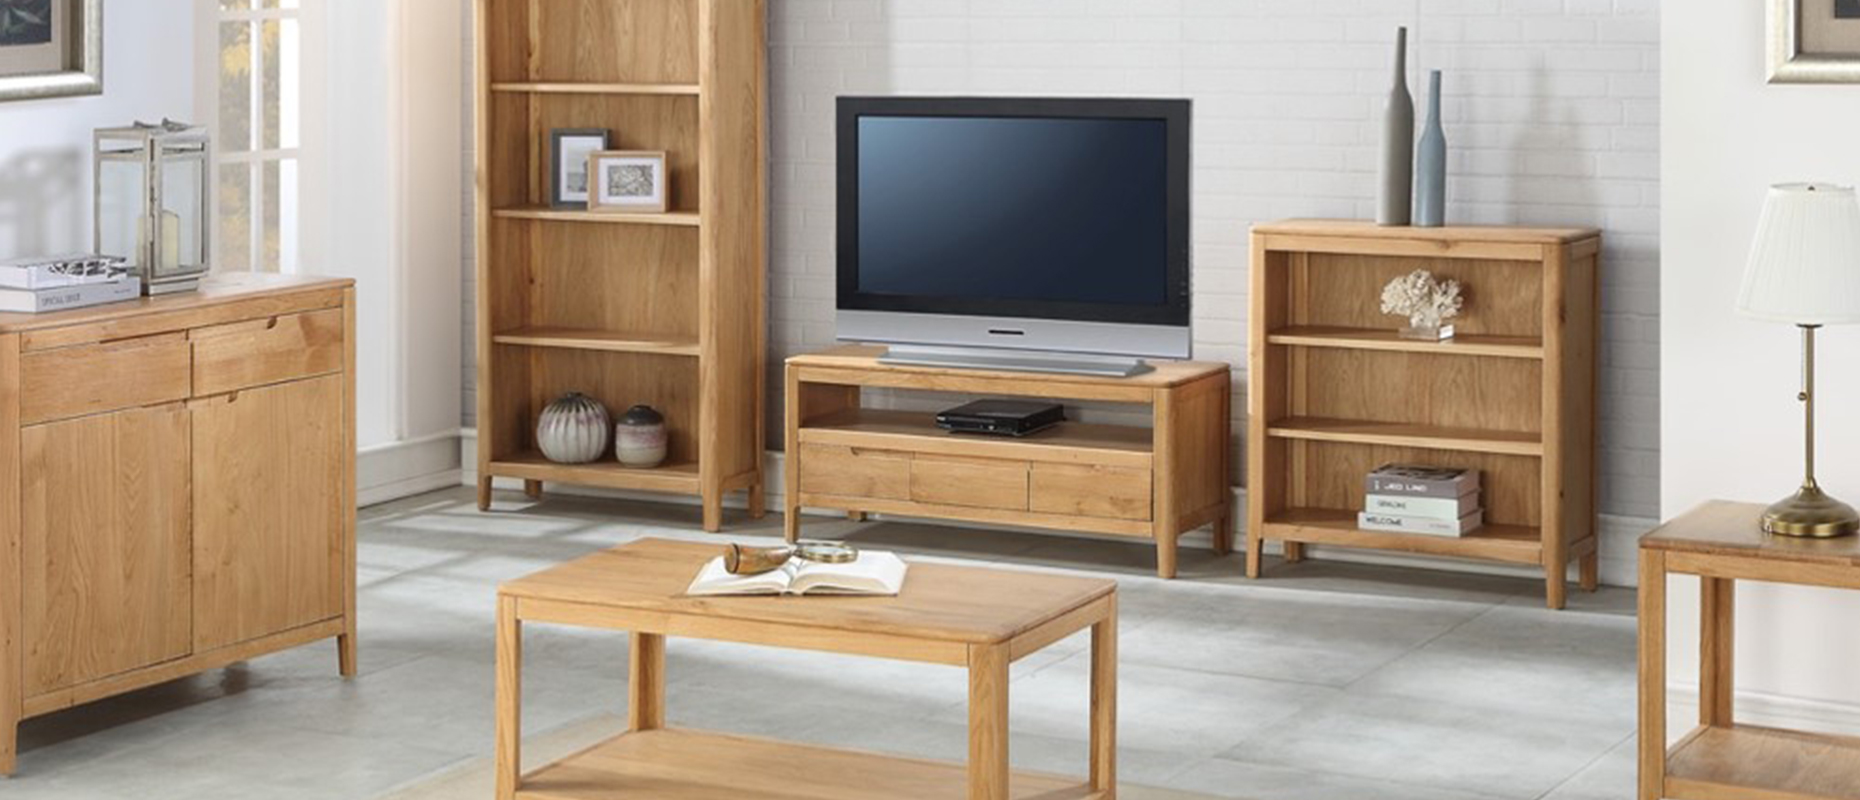 Dunmore Oak collection at Forrest Furnishing